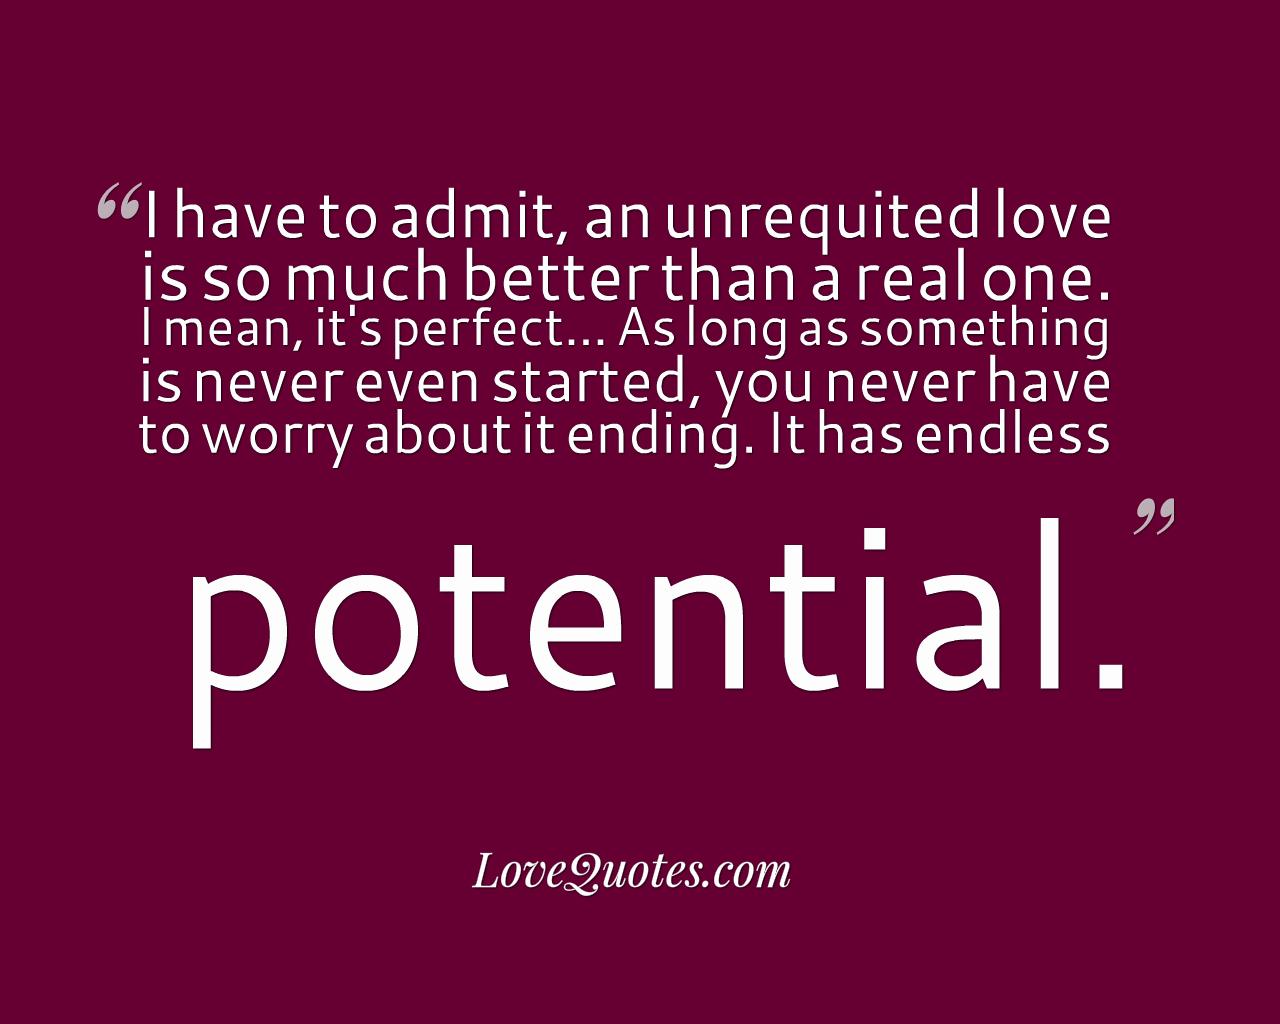 An Unrequited Love - Love Quotes